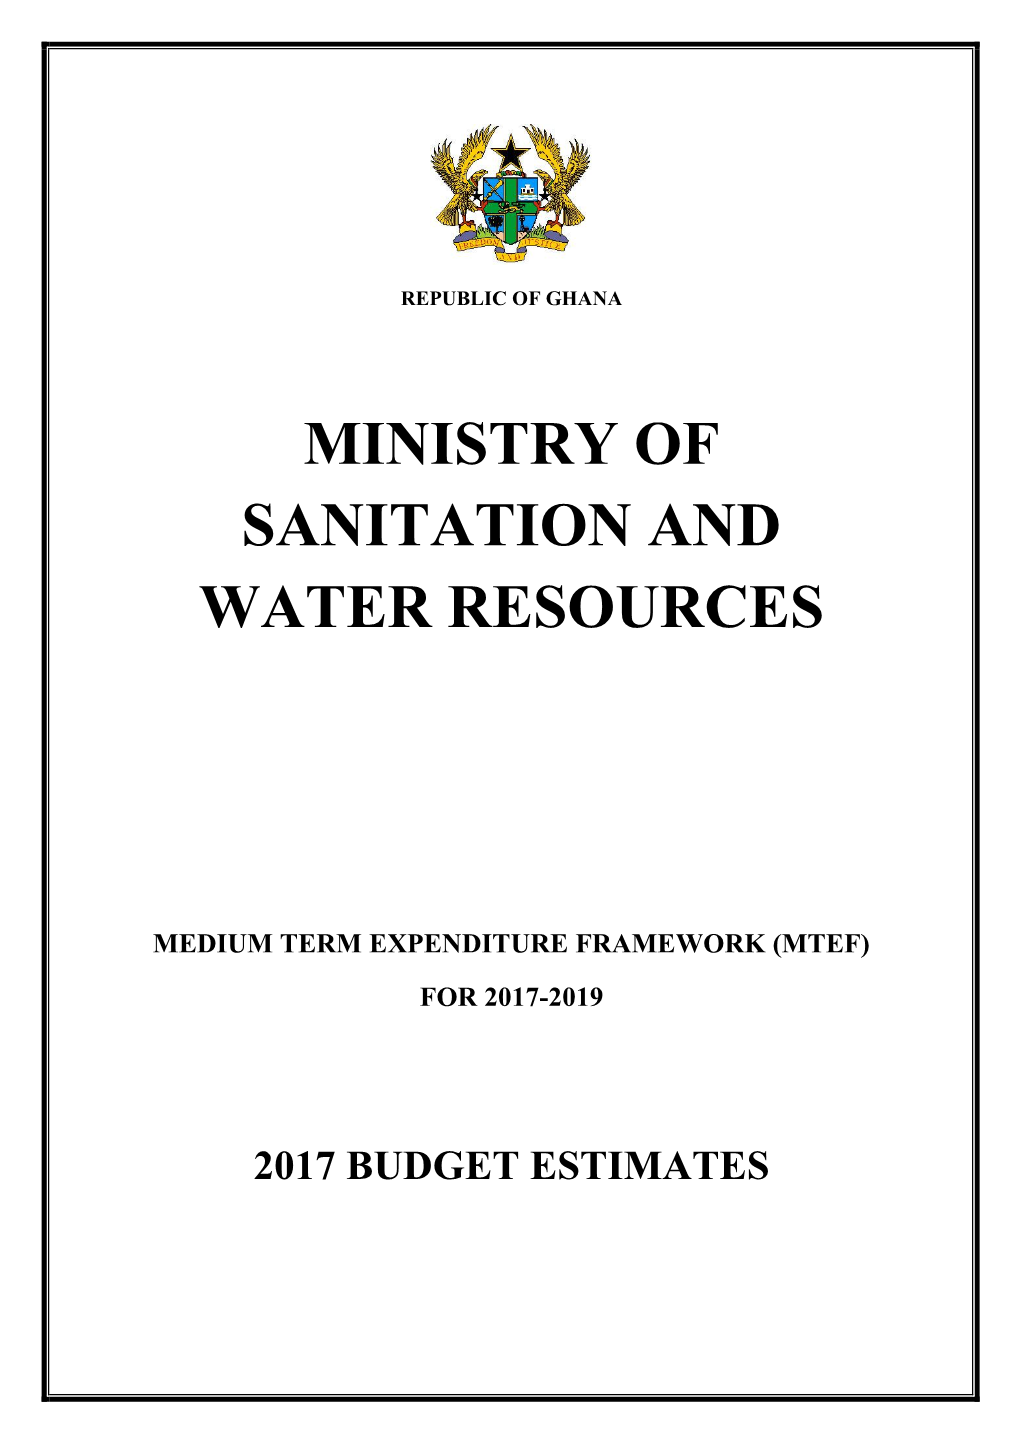 Ministry of Sanitation and Water Resources